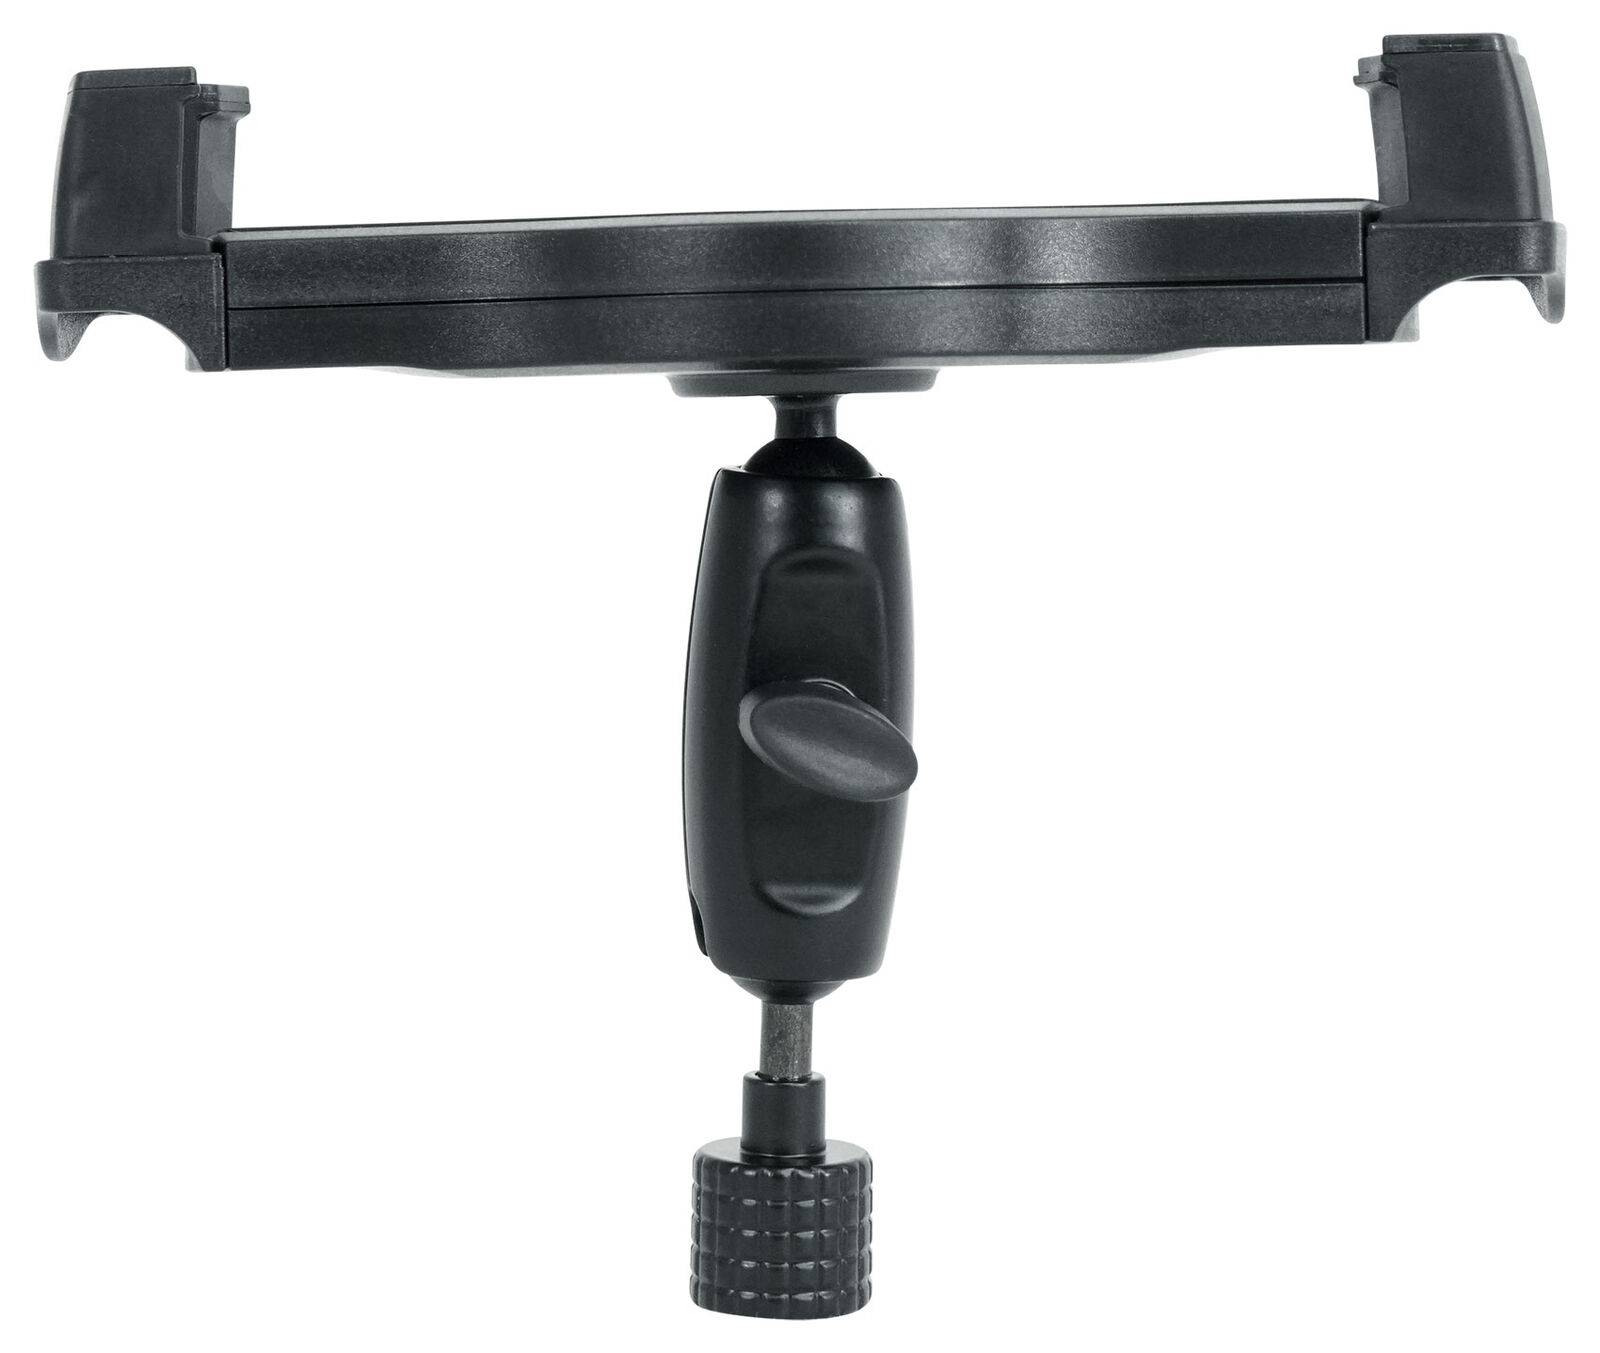 Rockville iStand 22 iPad/iPhone/Smartphone/Tablet Holder For Mic Stand/Boom Arm